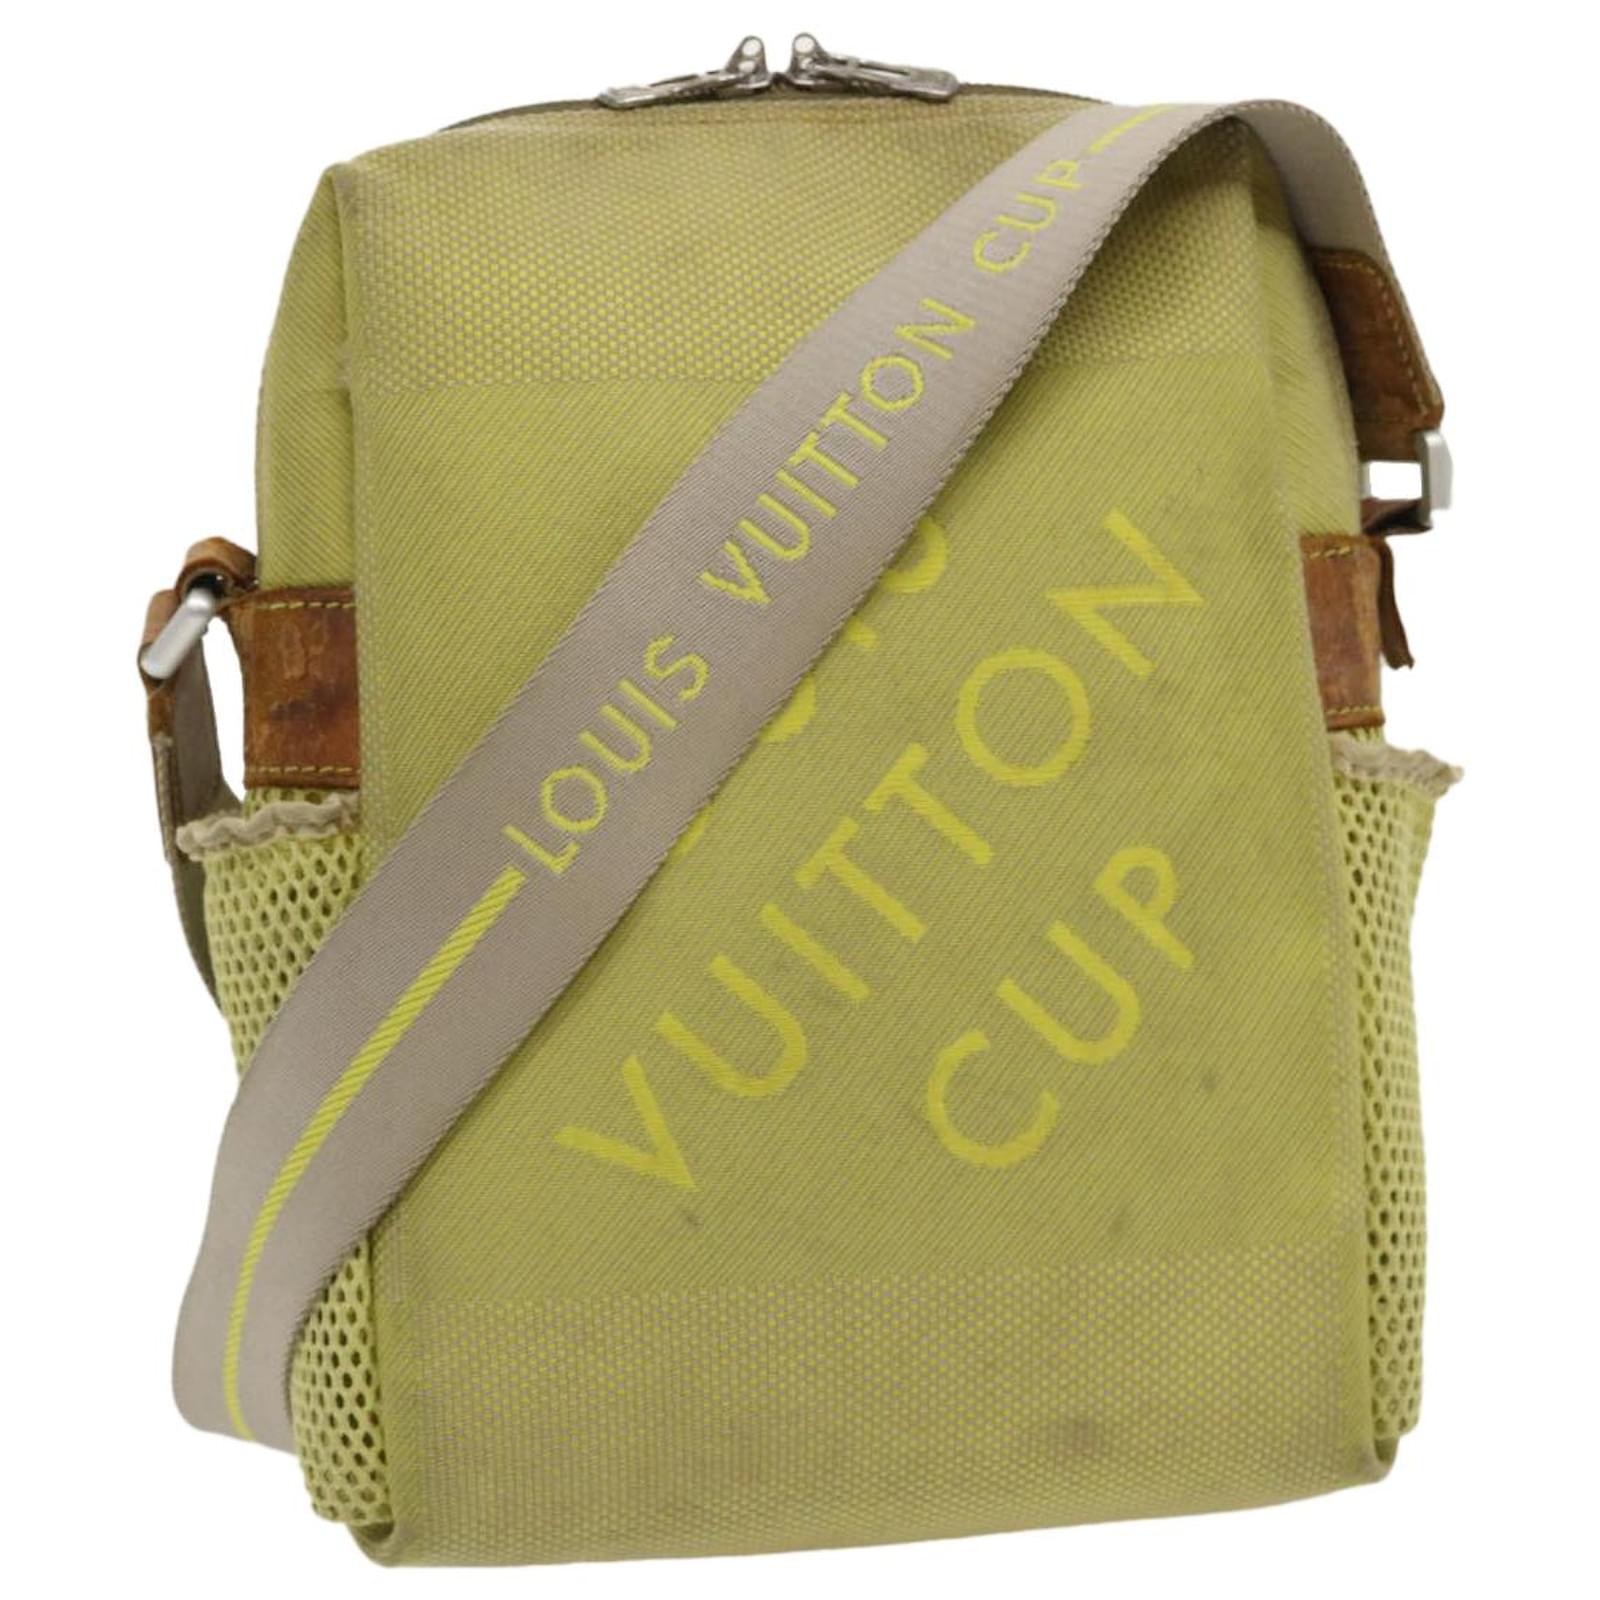 Louis Vuitton LV Cup Weatherly Crossbody Bag